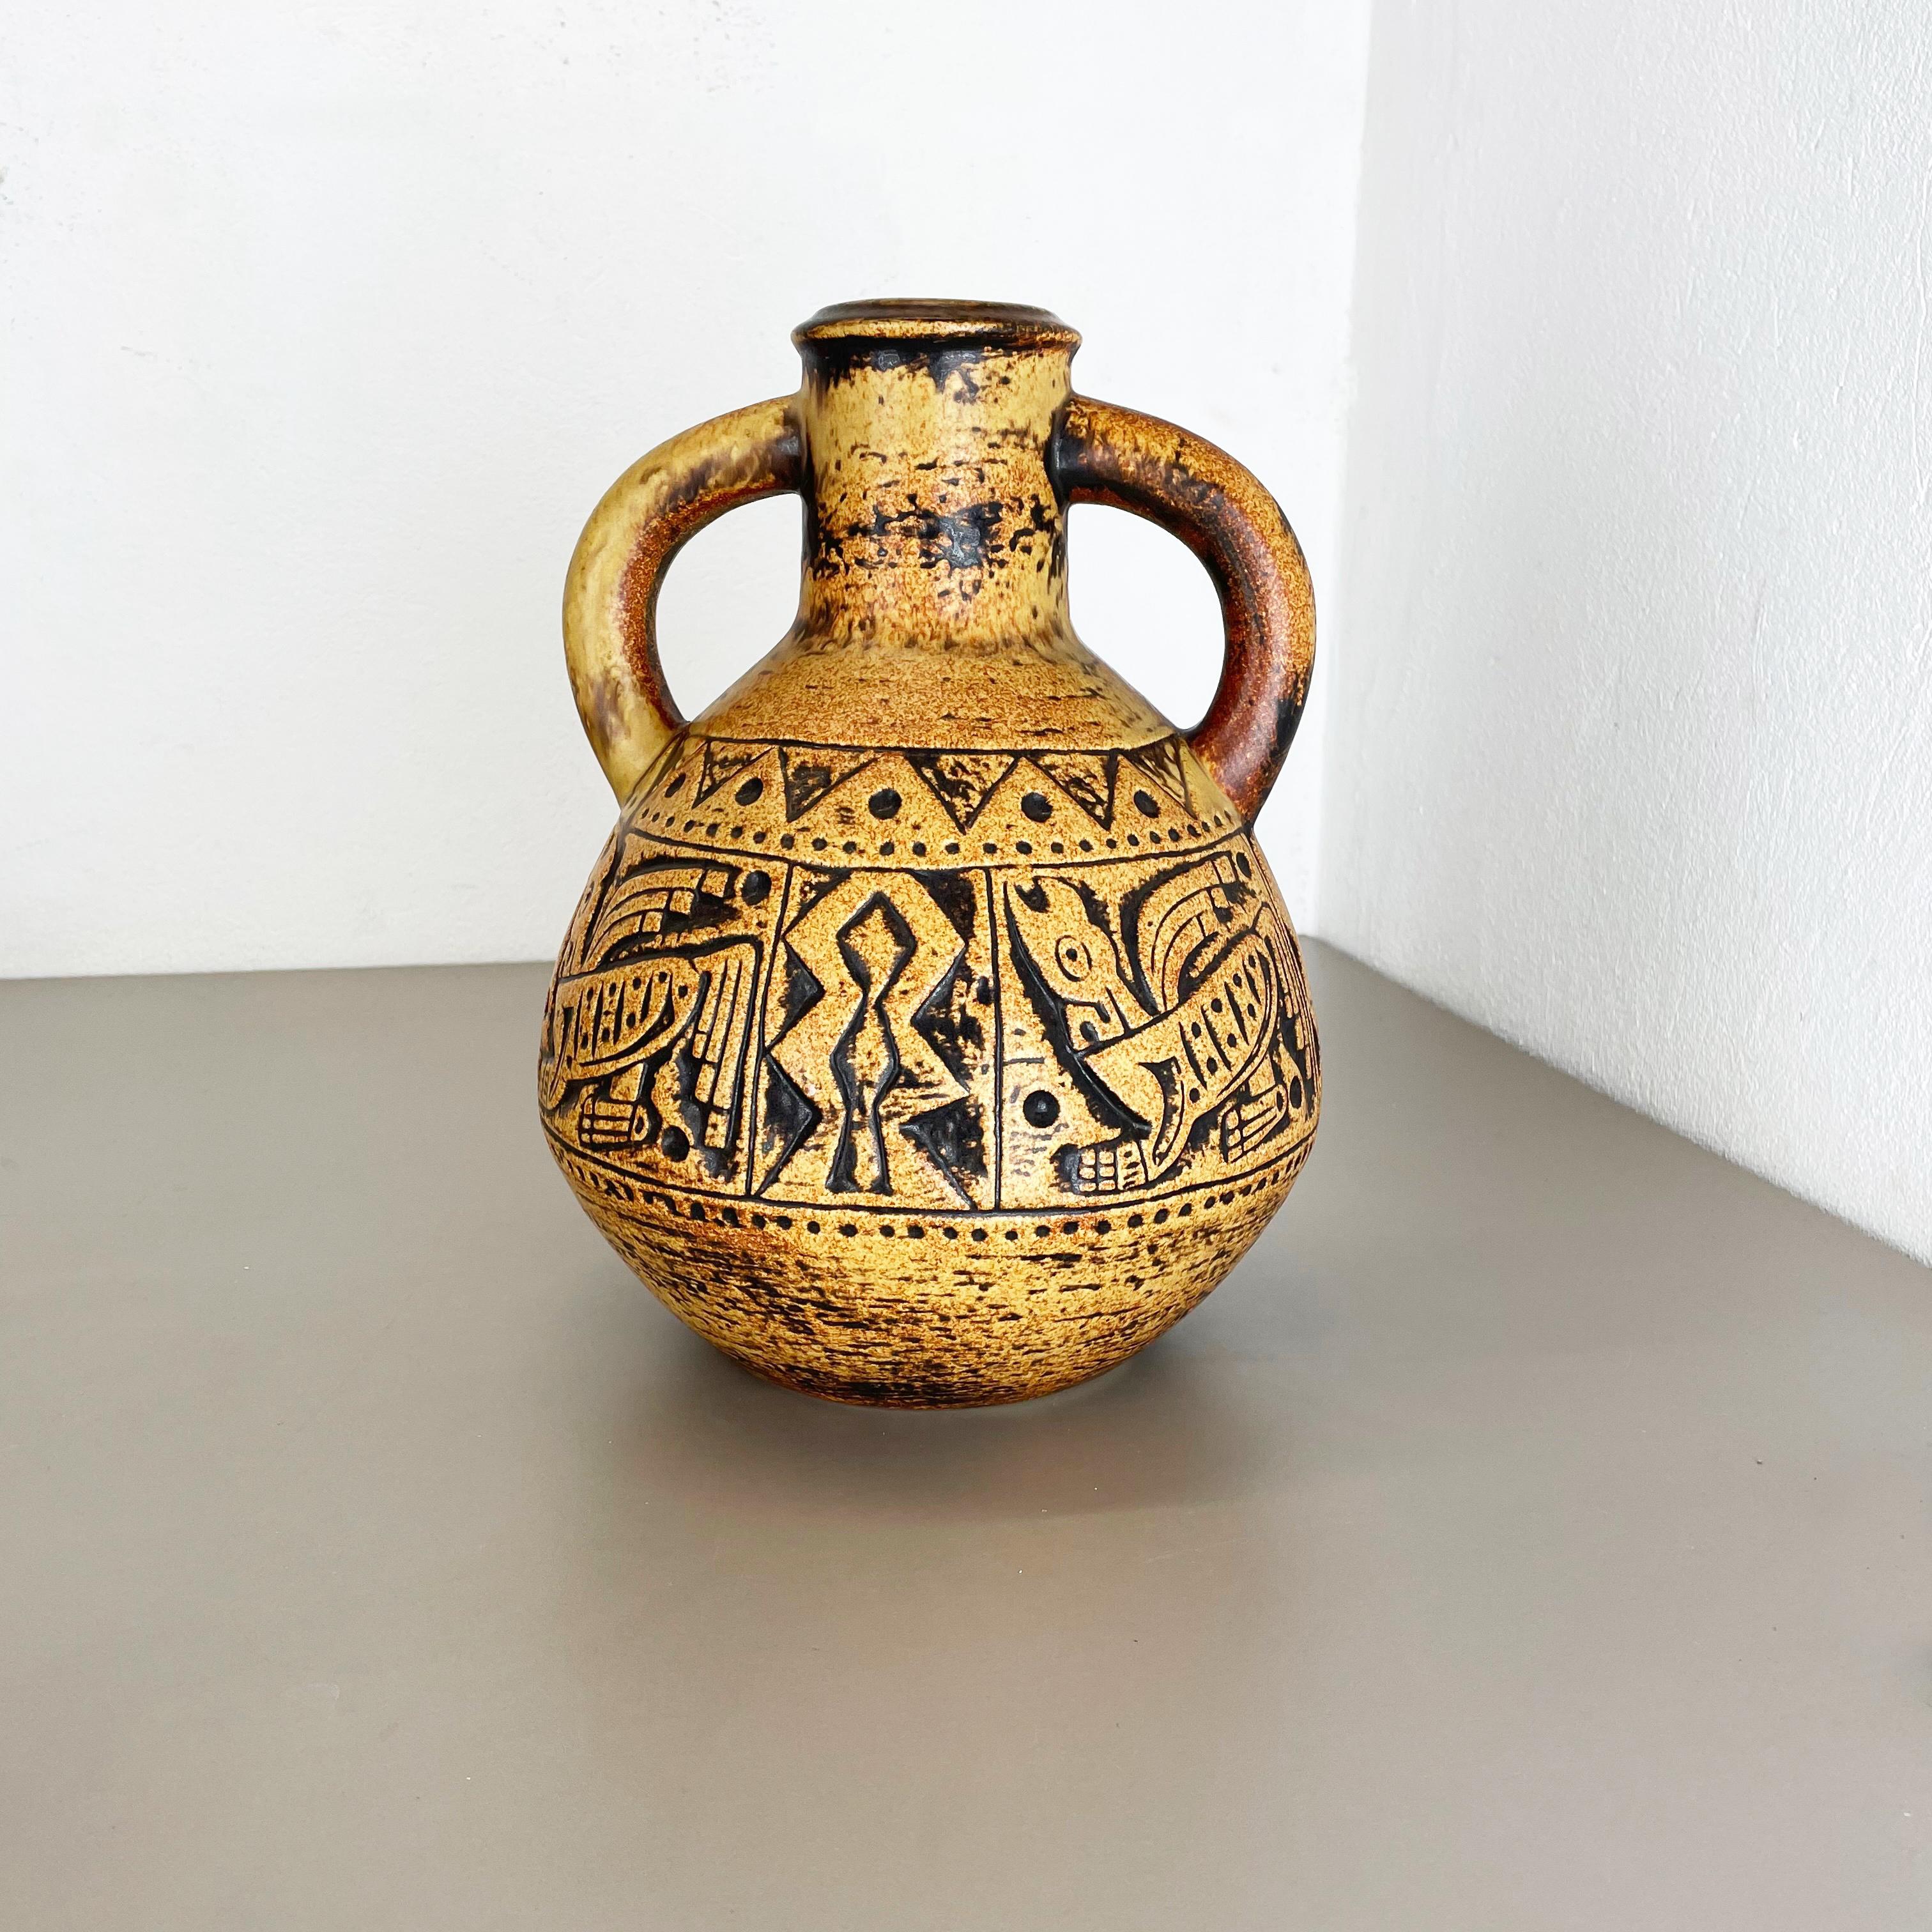 Article:

Pottery ceramic vase


Producer:

JASBA Ceramic, Germany



Decade:

1970s




Original vintage 1970s pottery ceramic vase made in Germany. High quality German production with a nice abstract brutalist structure and super